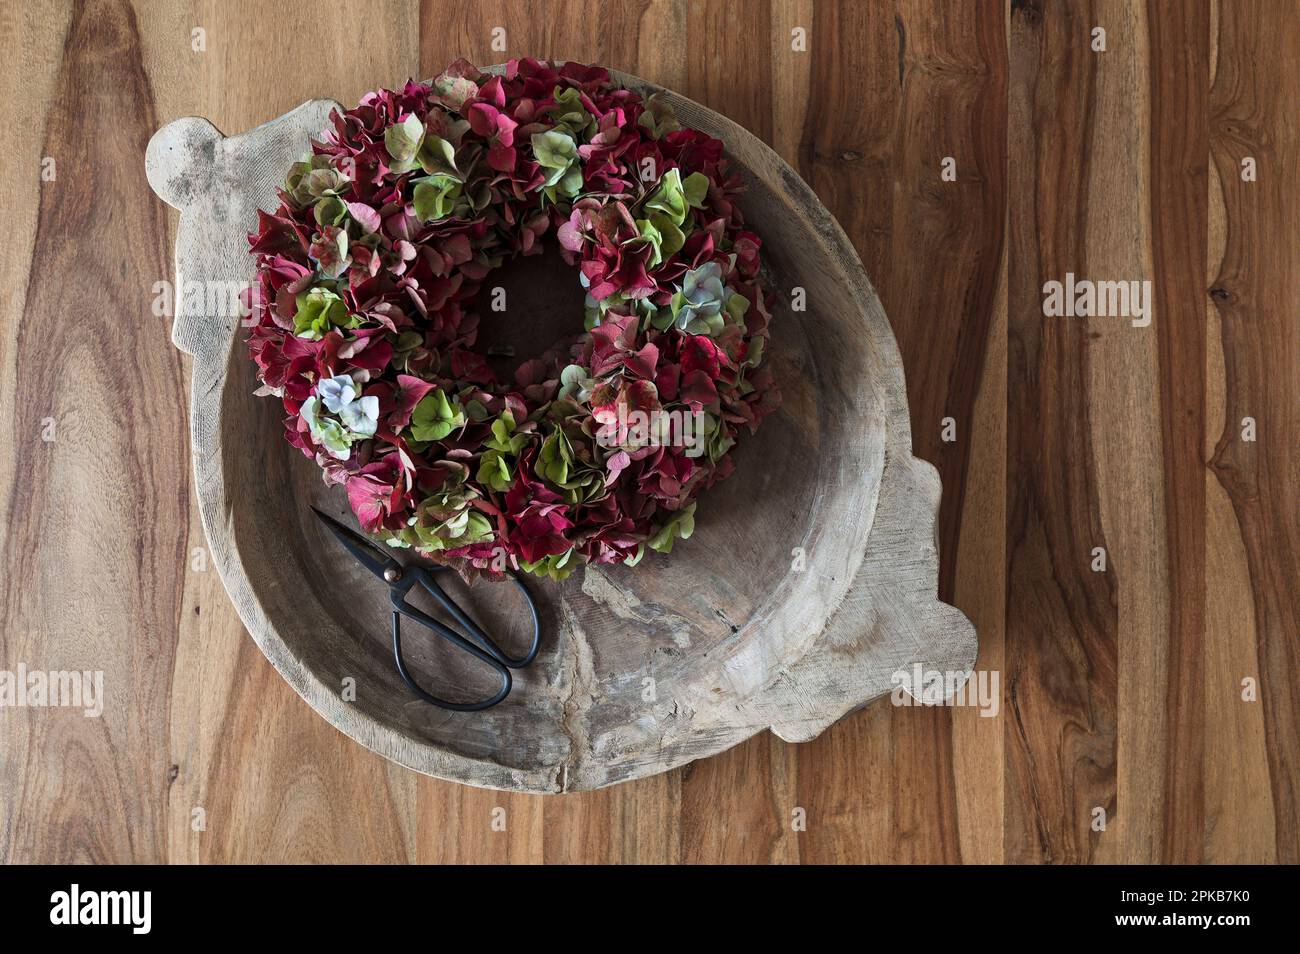 Flower wreath tied from dark red and green hydrangea flowers, arranged in old wooden bowl with flower scissors, decoration with natural materials Stock Photo